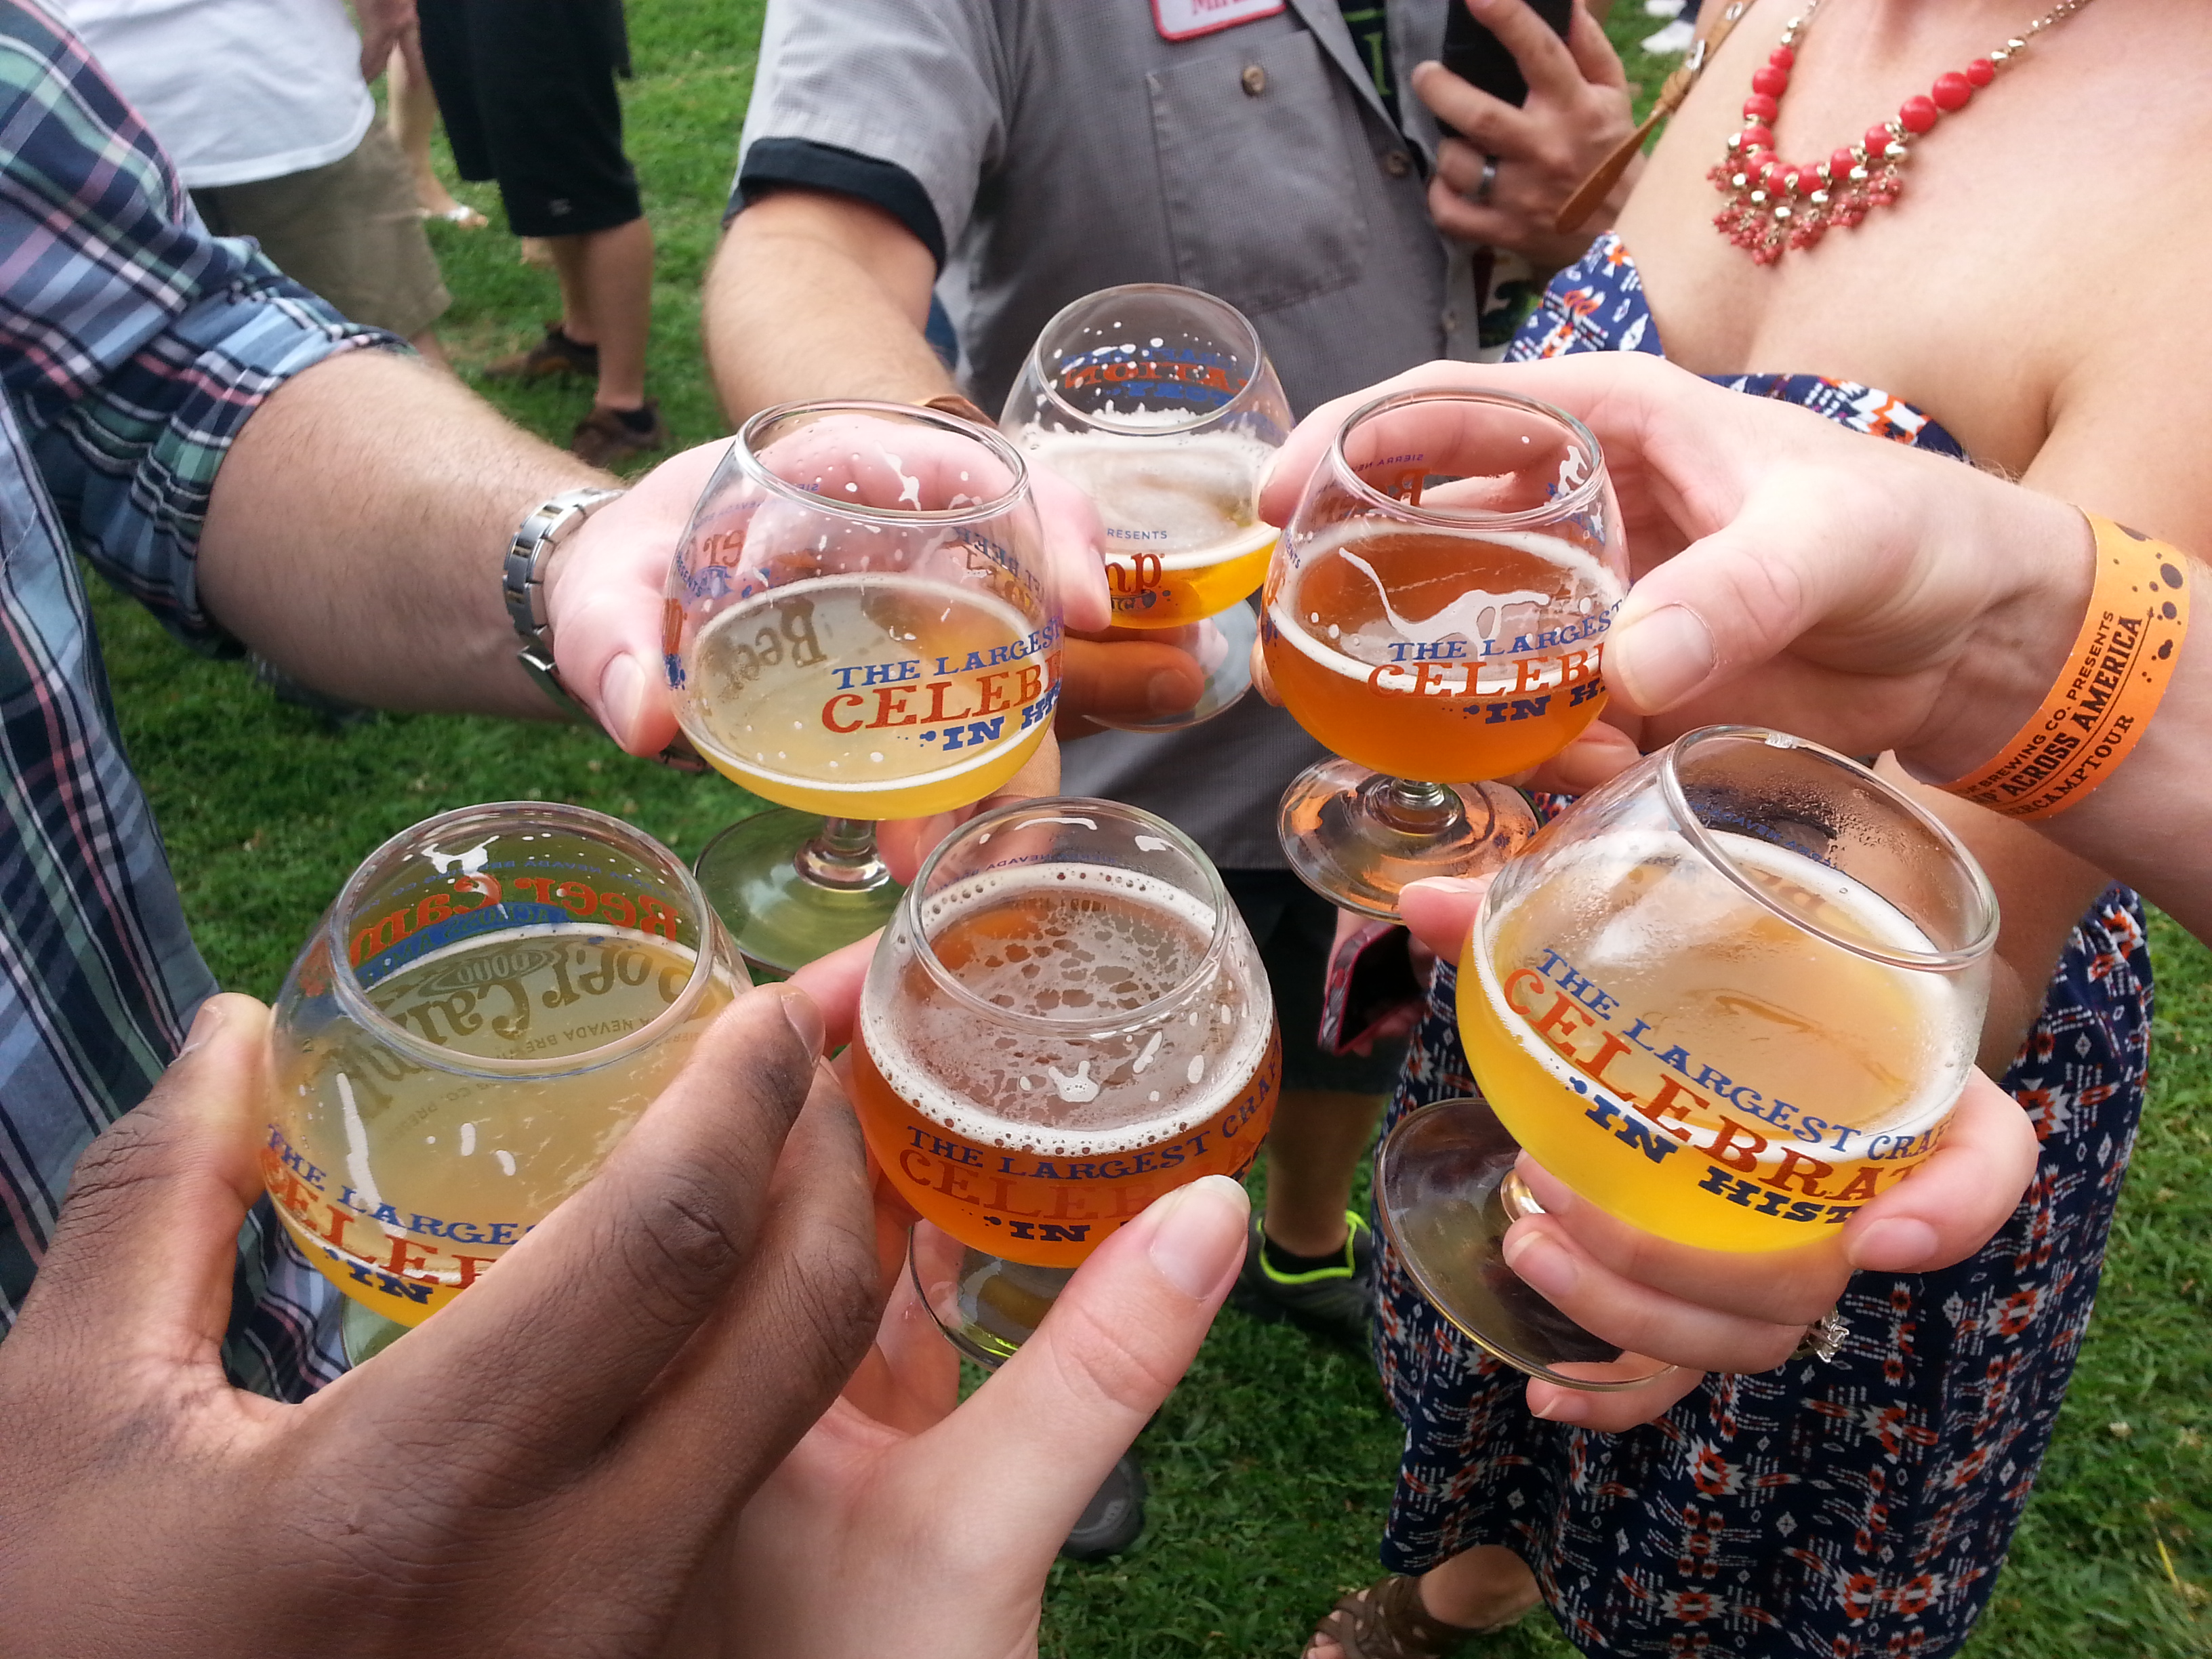 Sierra Nevada Beer Fans: Beer Camp on Tour Comes to Long Beach, California This June!